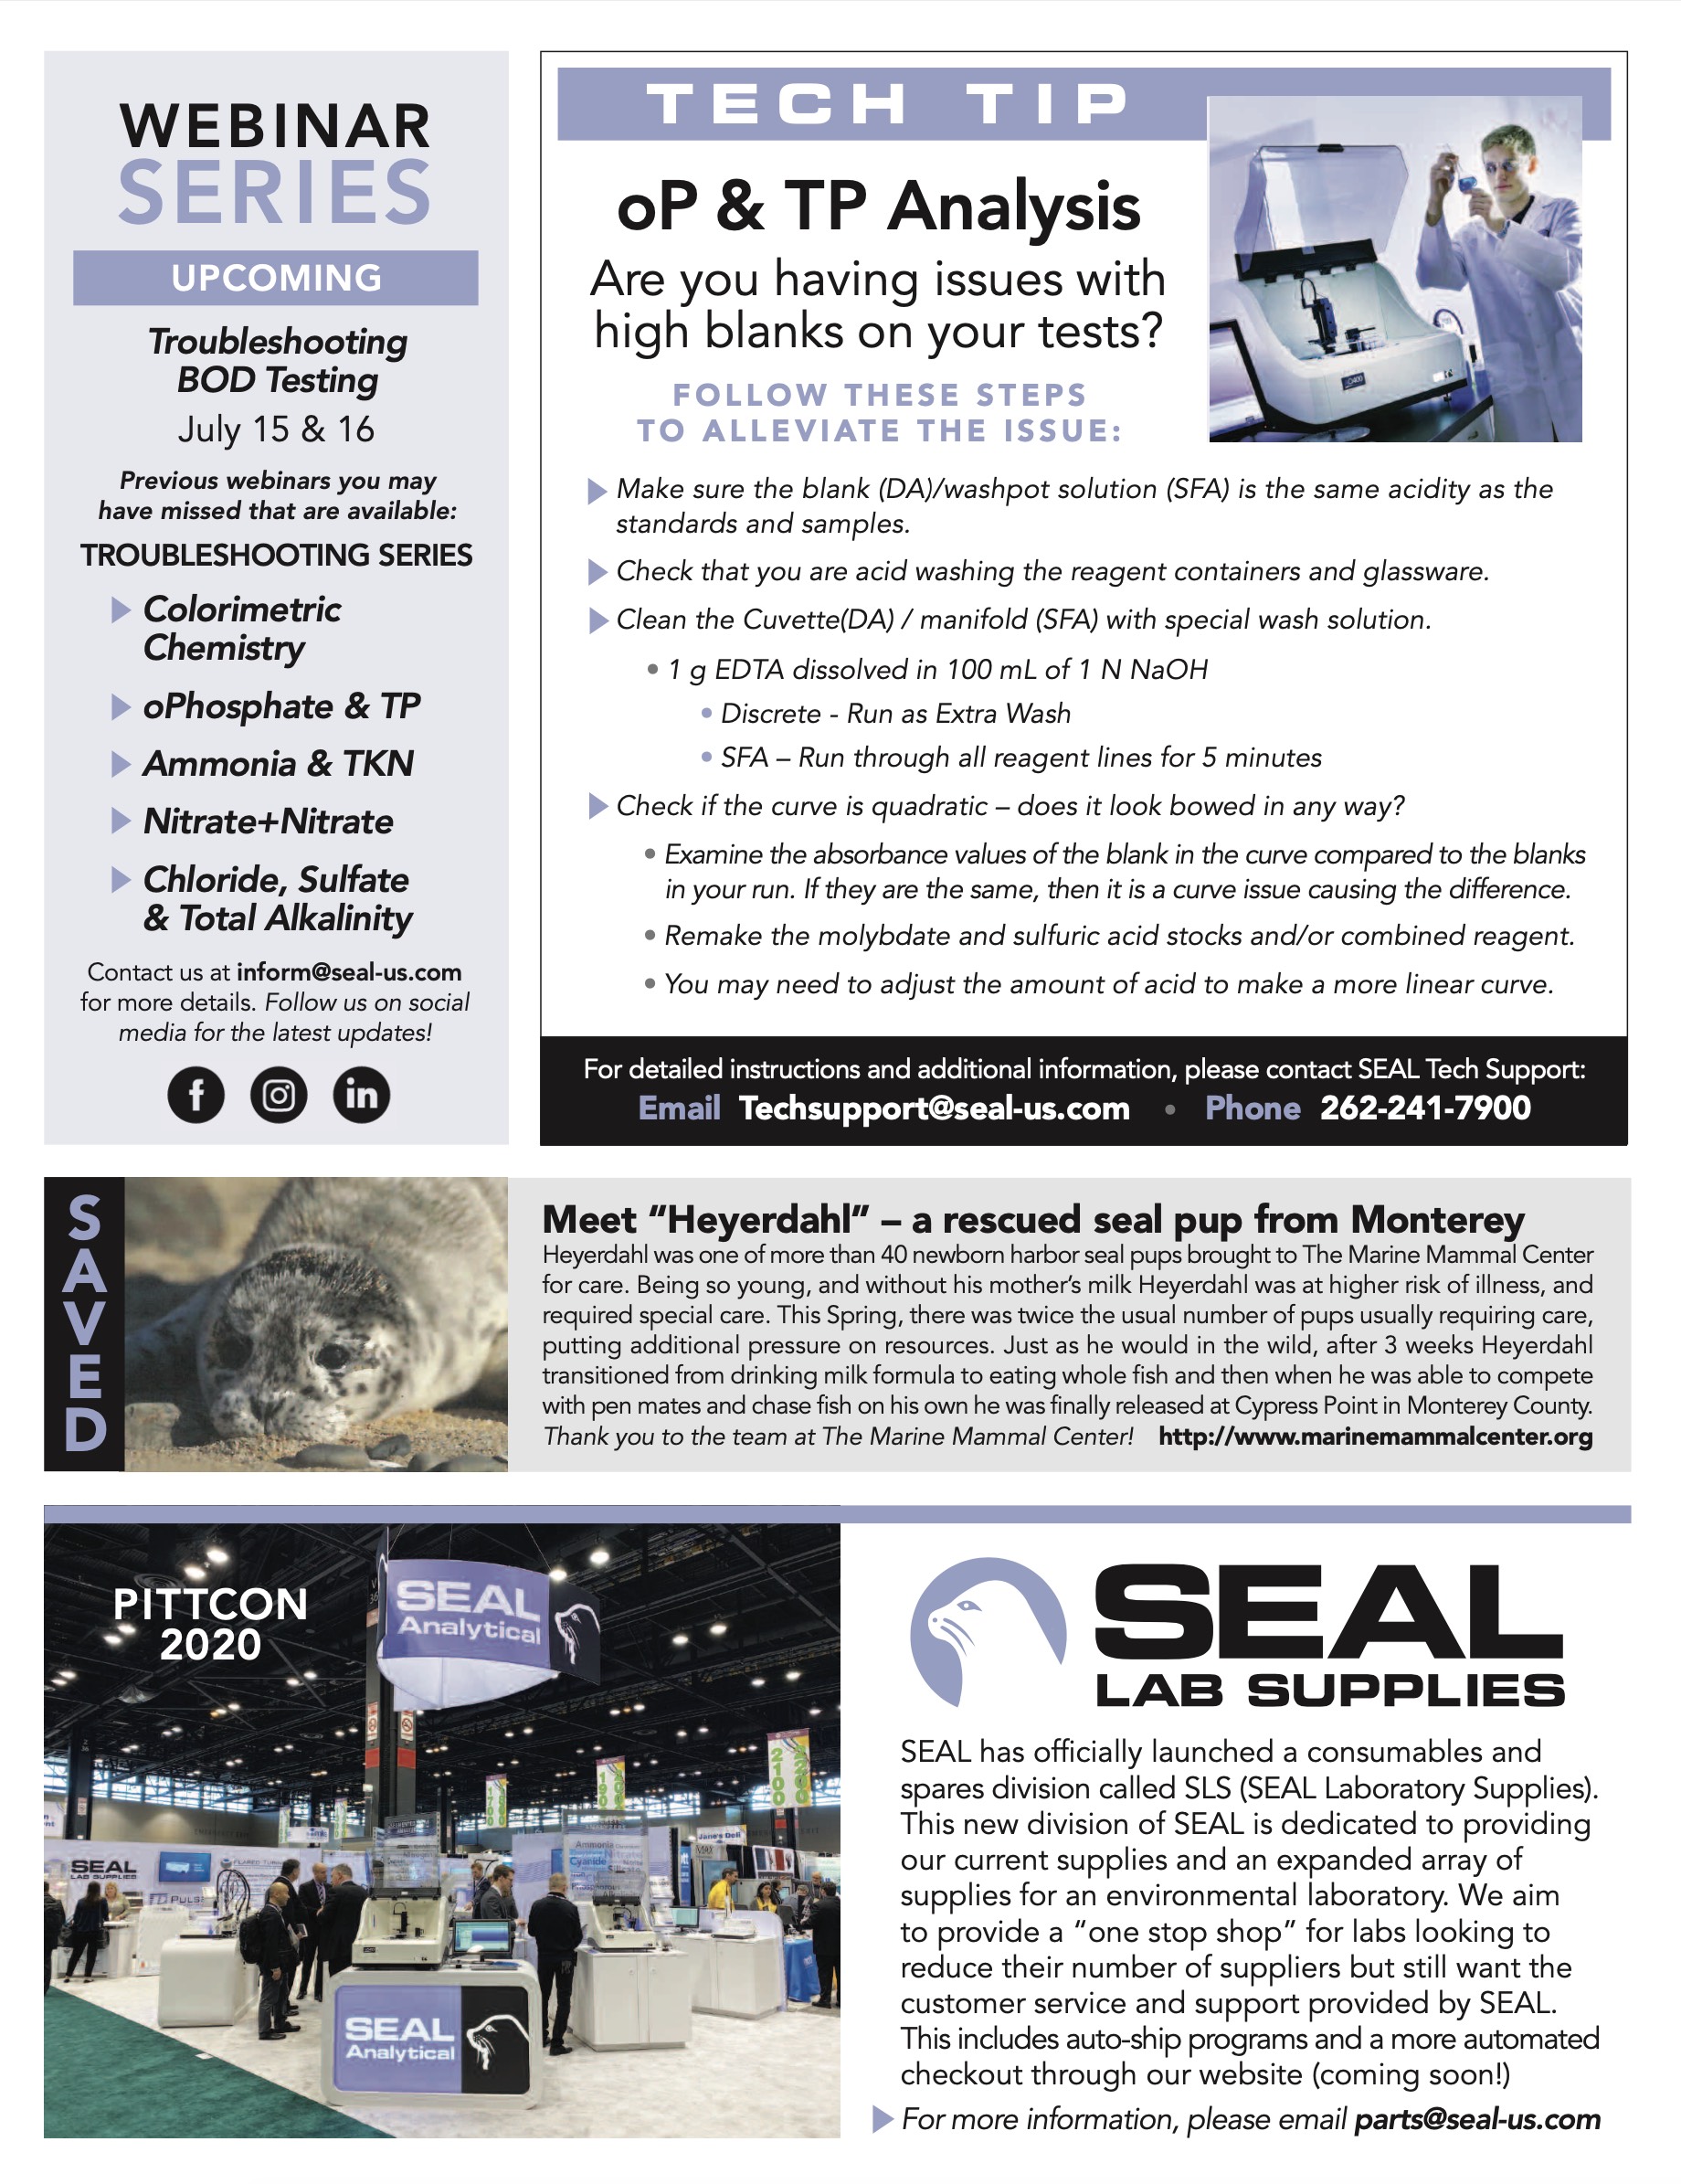 SEAL Analytical Newsletter Summer 2020 Page 3